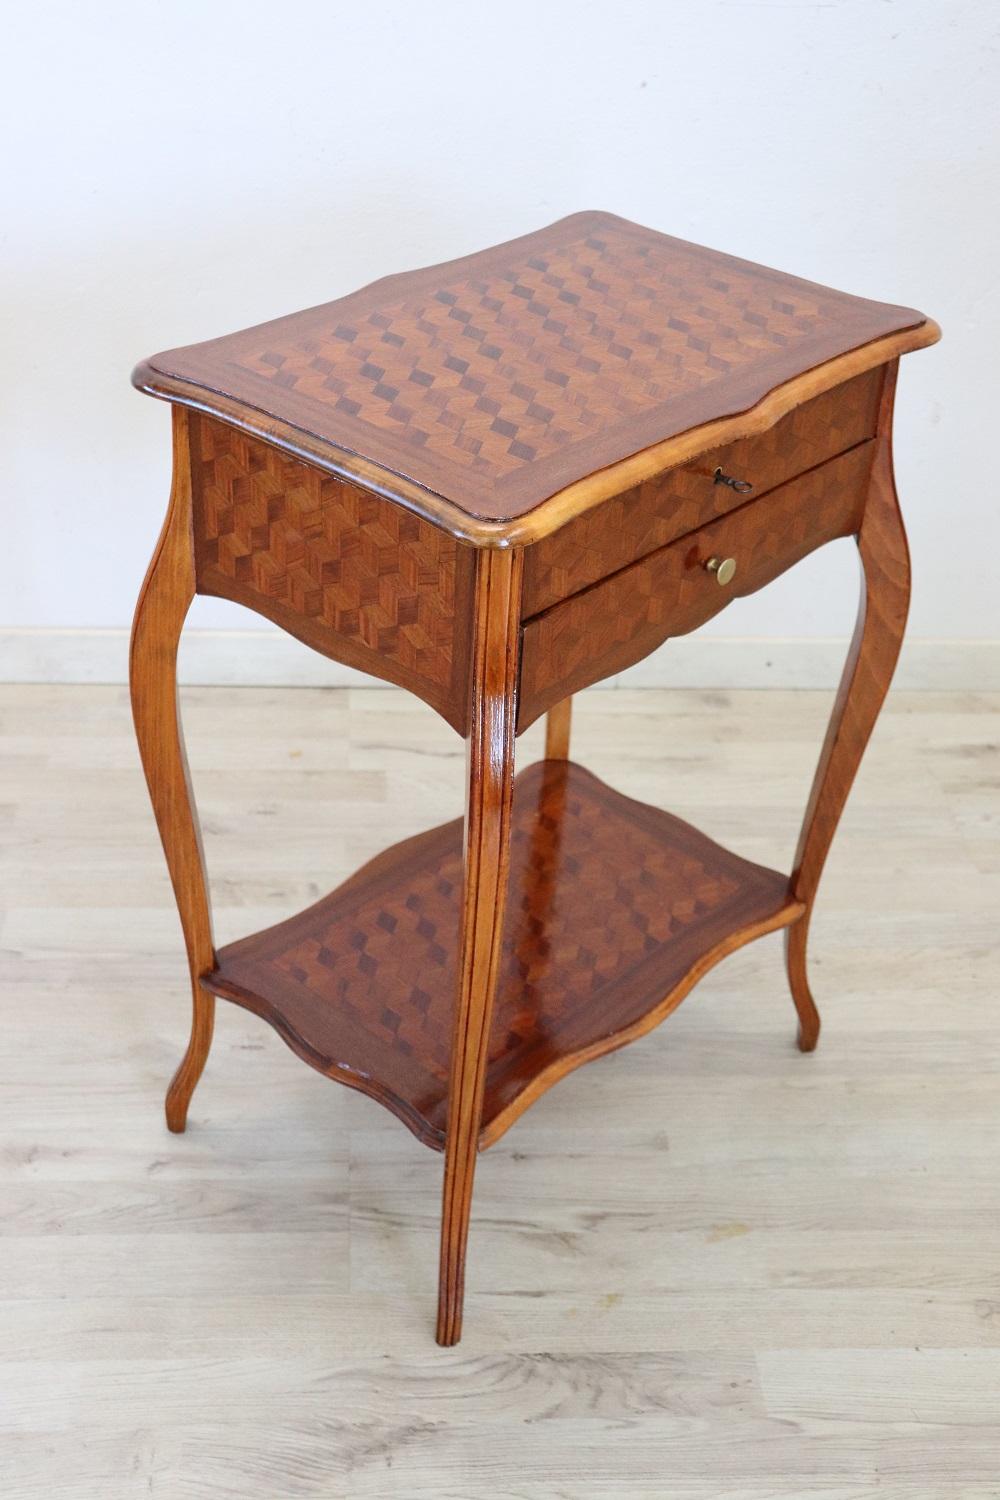 Rare and fine quality French Louis XV style 1930s side table in inlay marquetry wood, the legs are long and slender. The decoration is on each side so you can place the tables also in the centre of the room. We advise you to look carefully at all